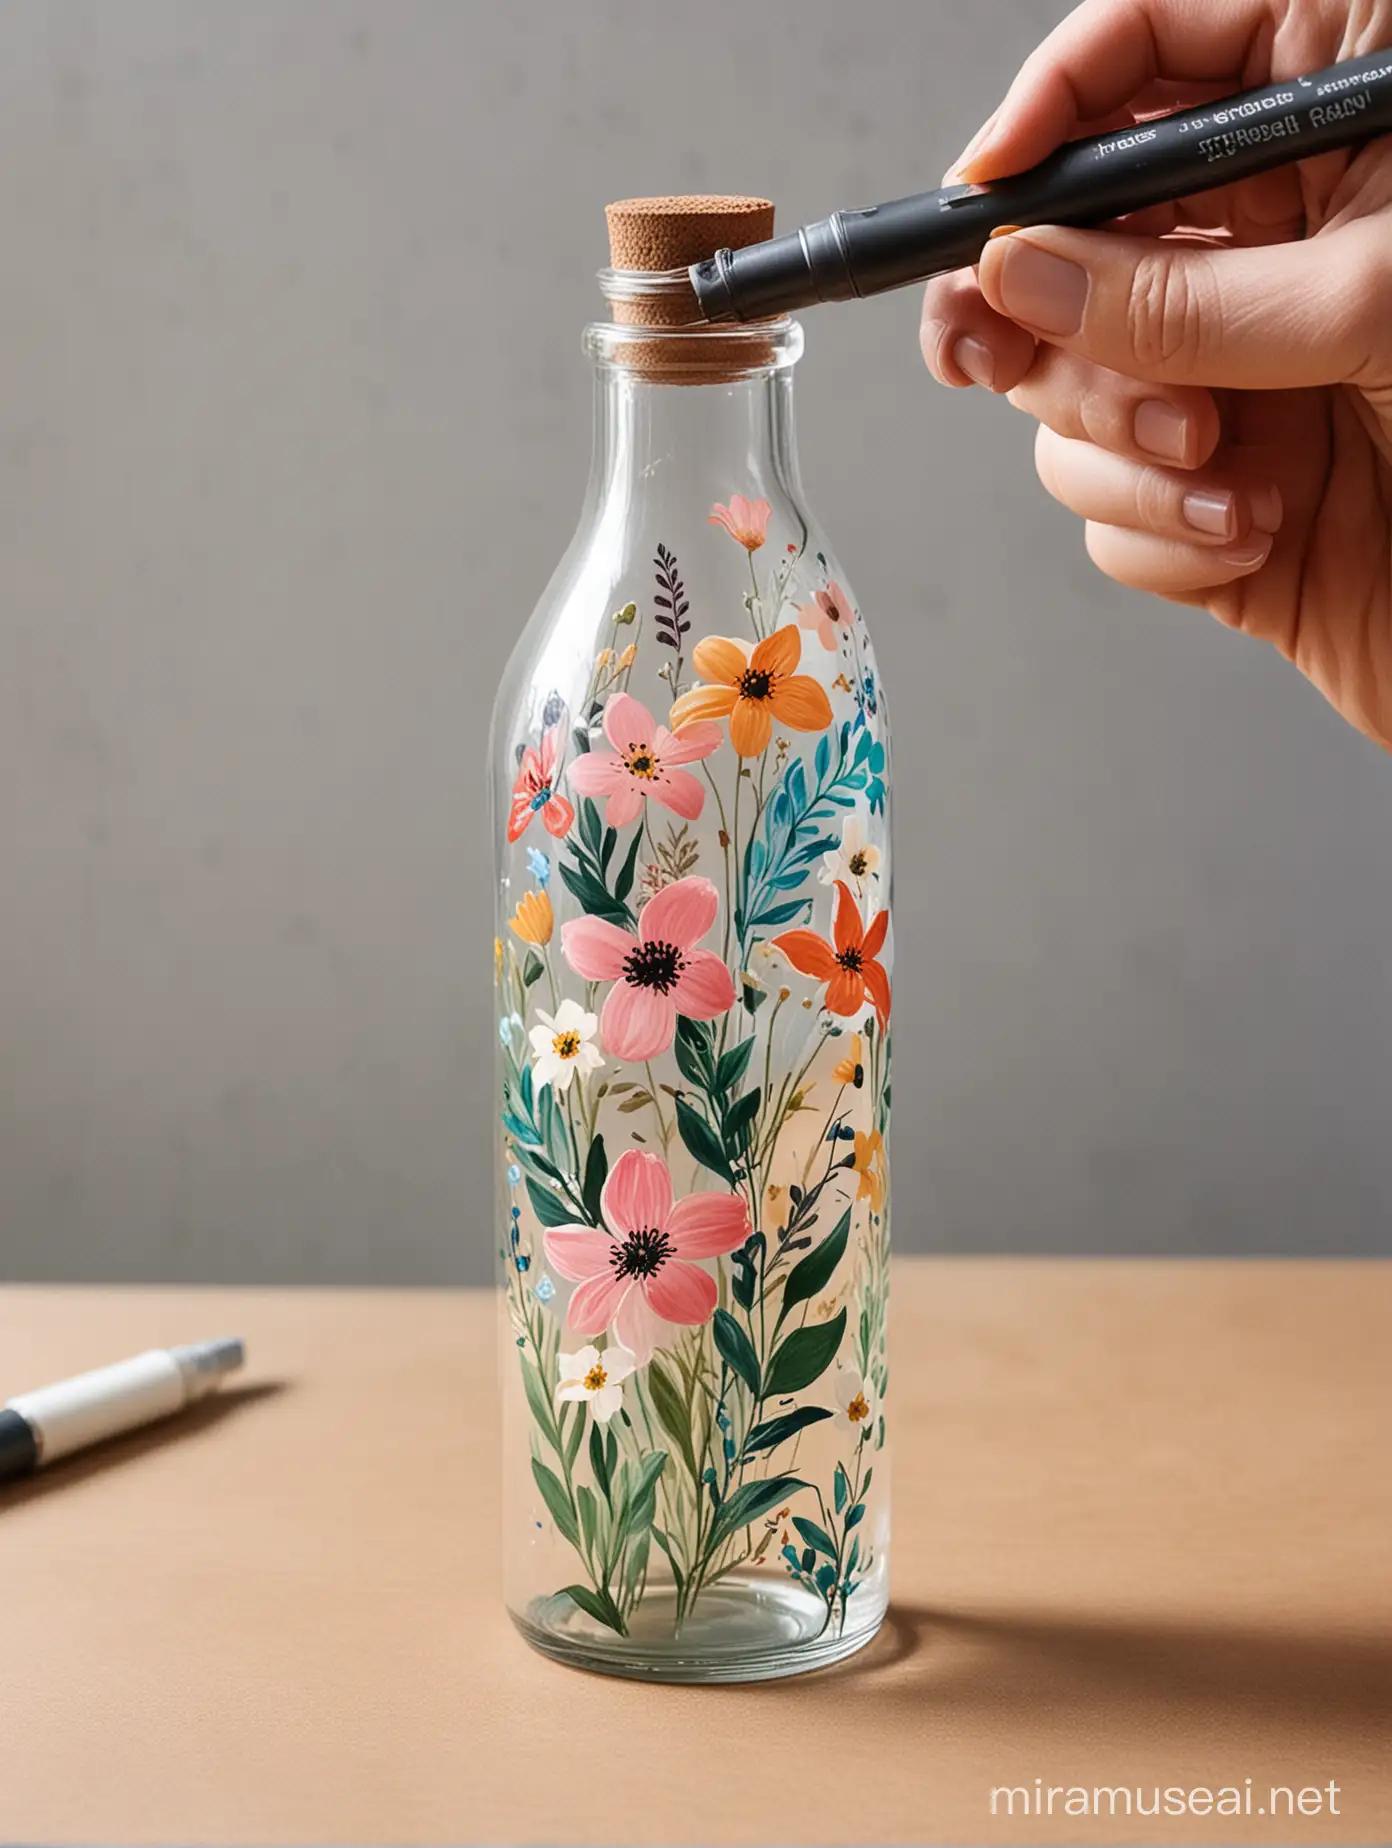 An artist painting a simple floral pattern on a glass bottle with acrylic paints 